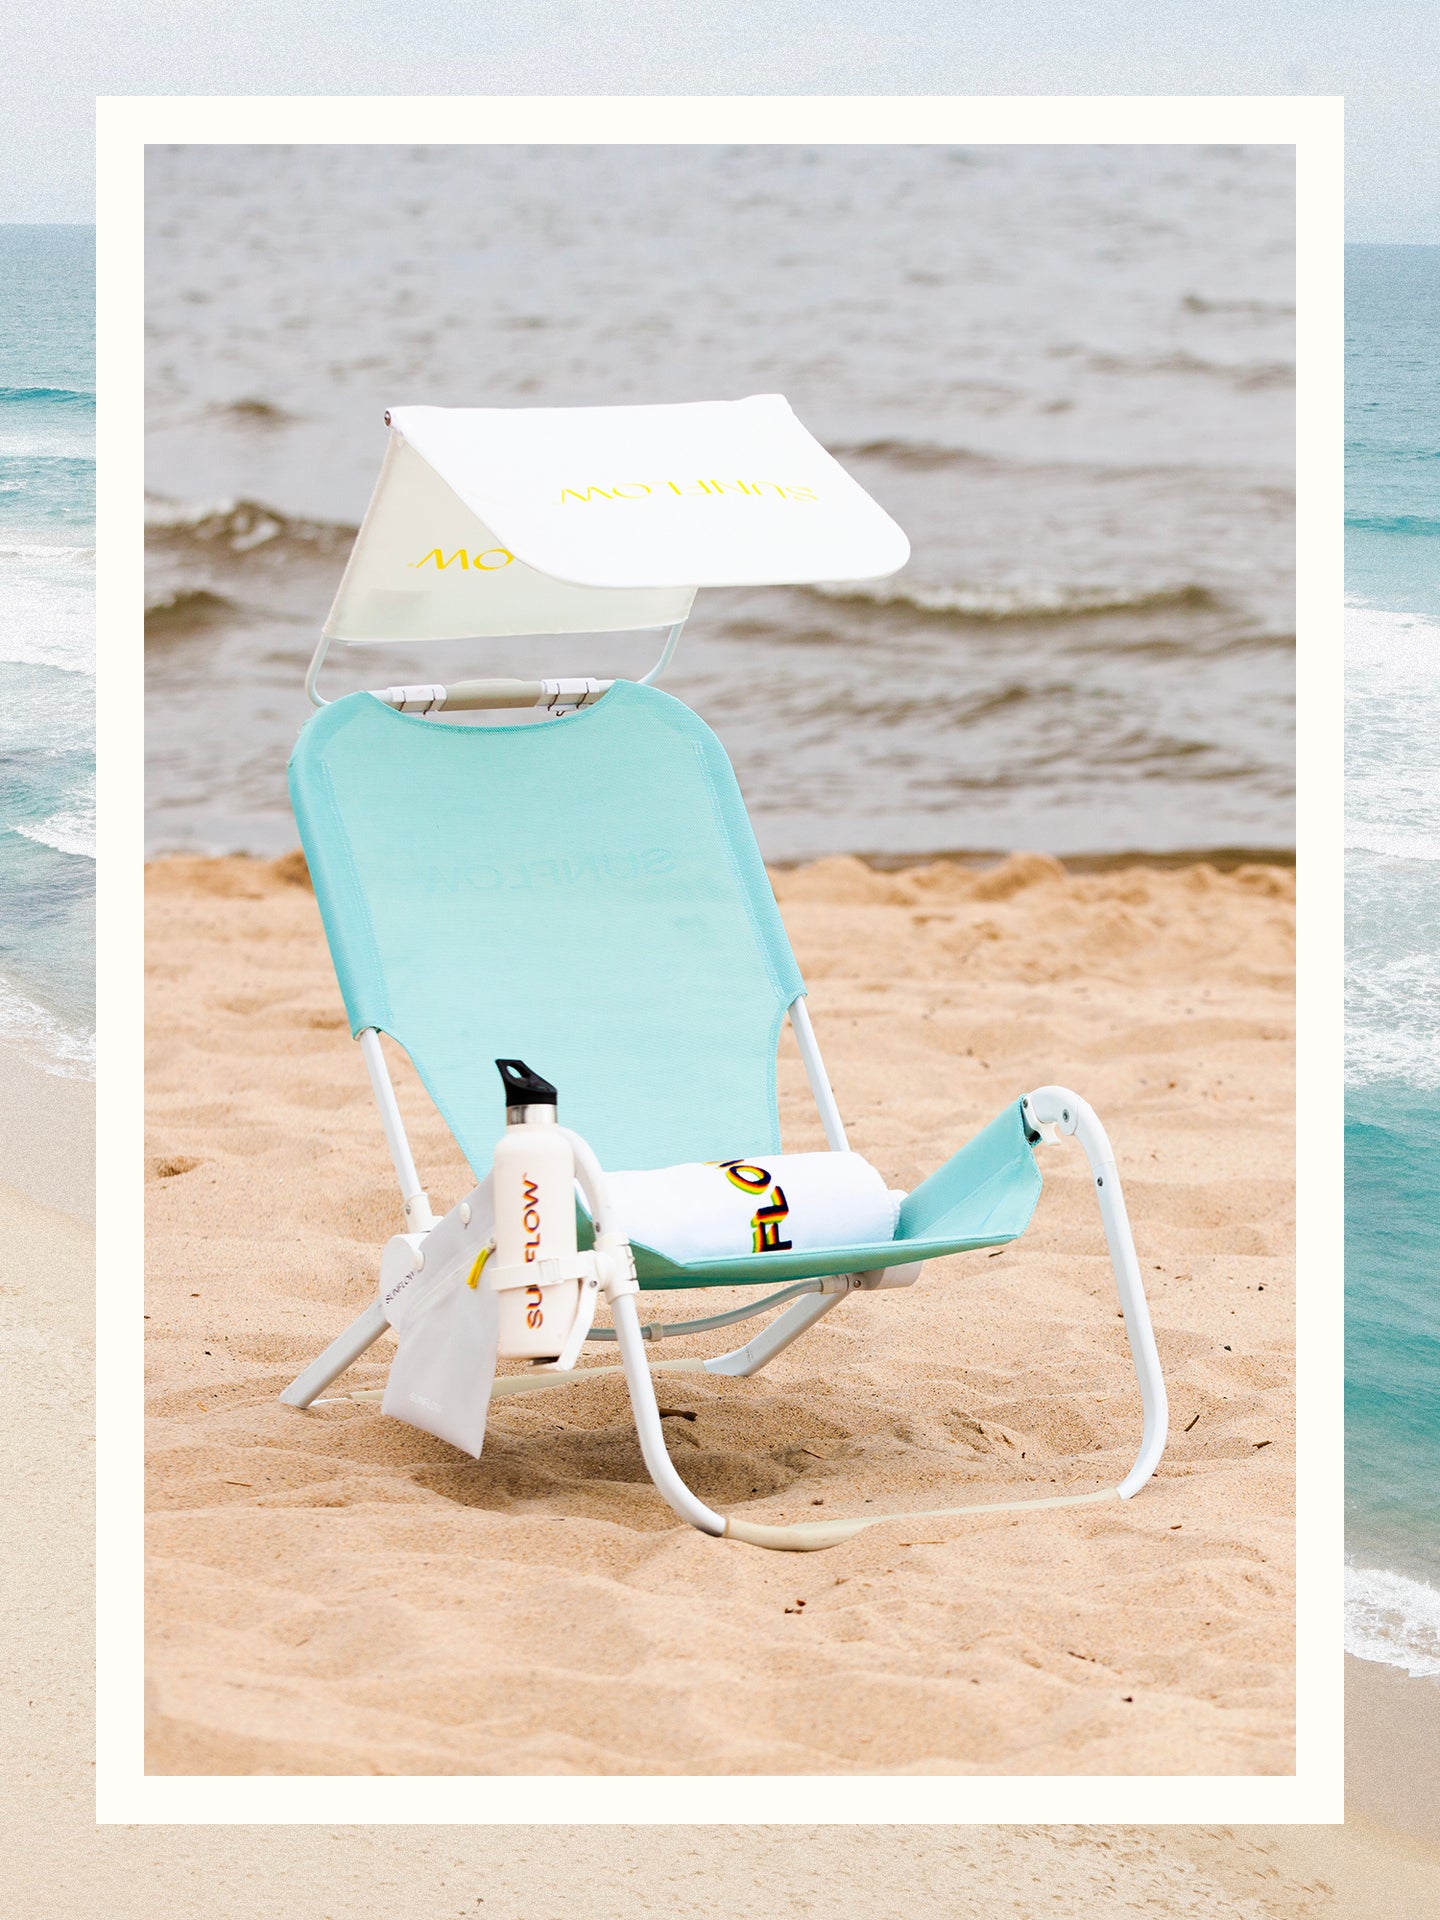 Blue sunflow chair on beach with attachments